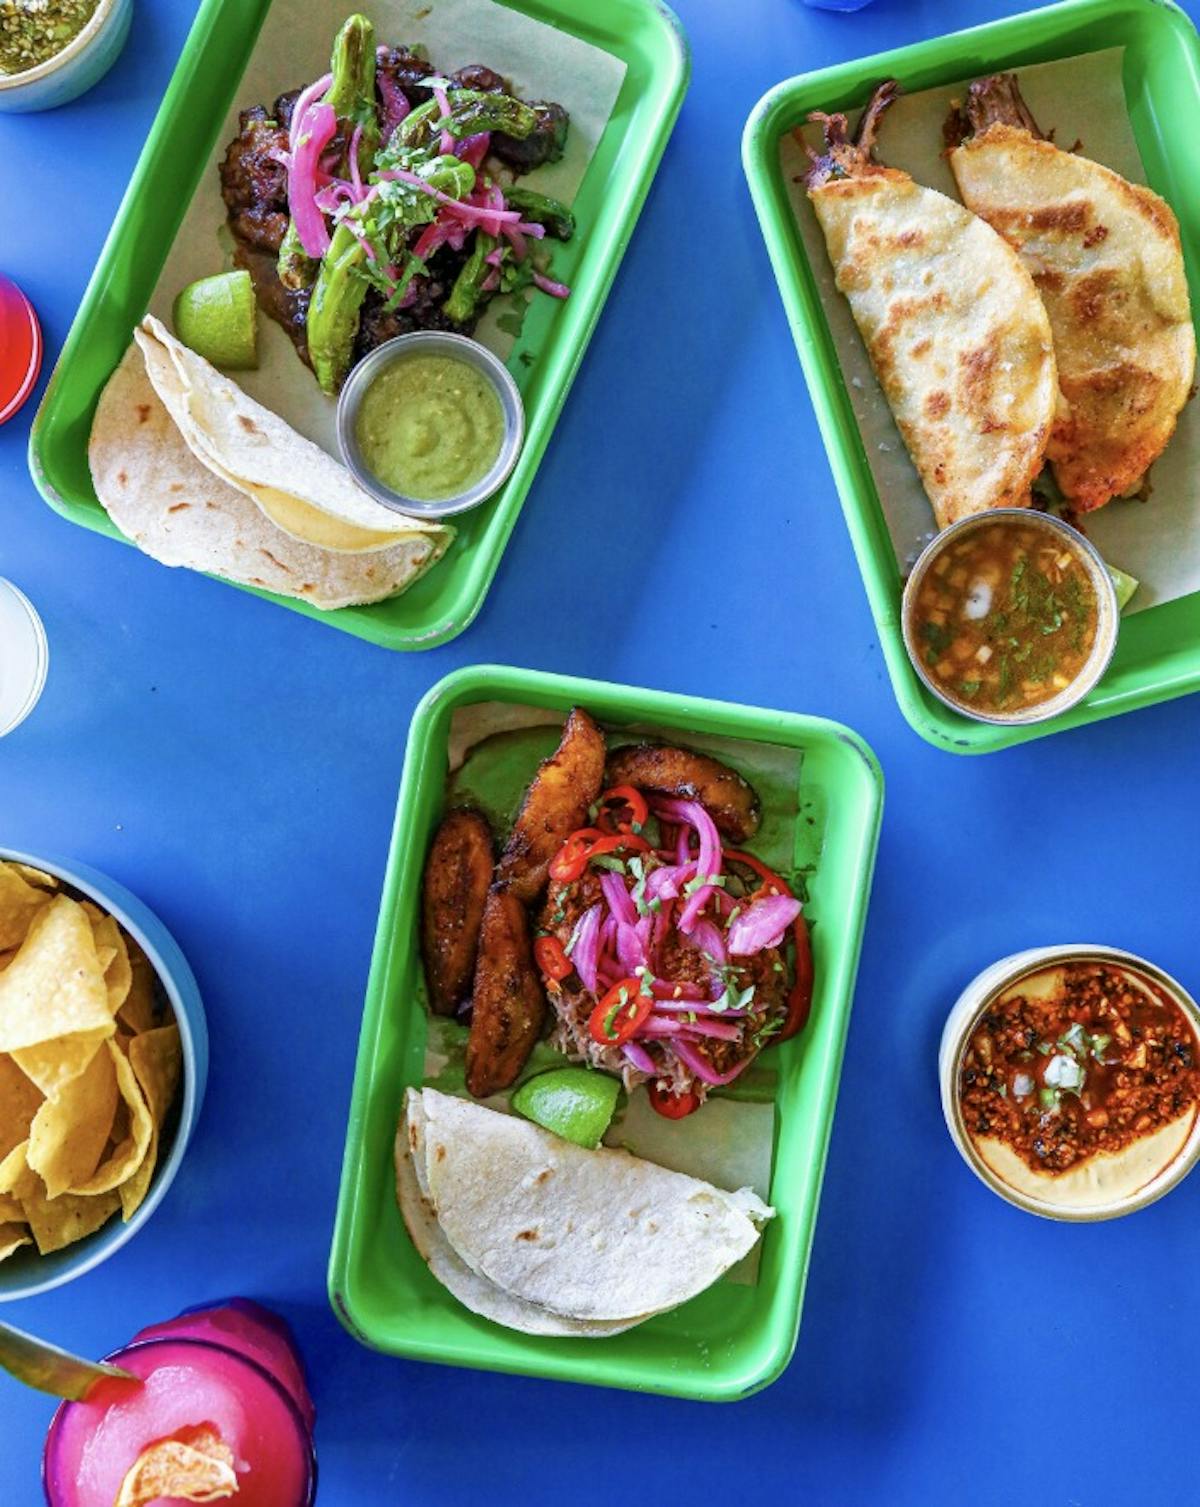 a plastic container filled with different types of food on a tray